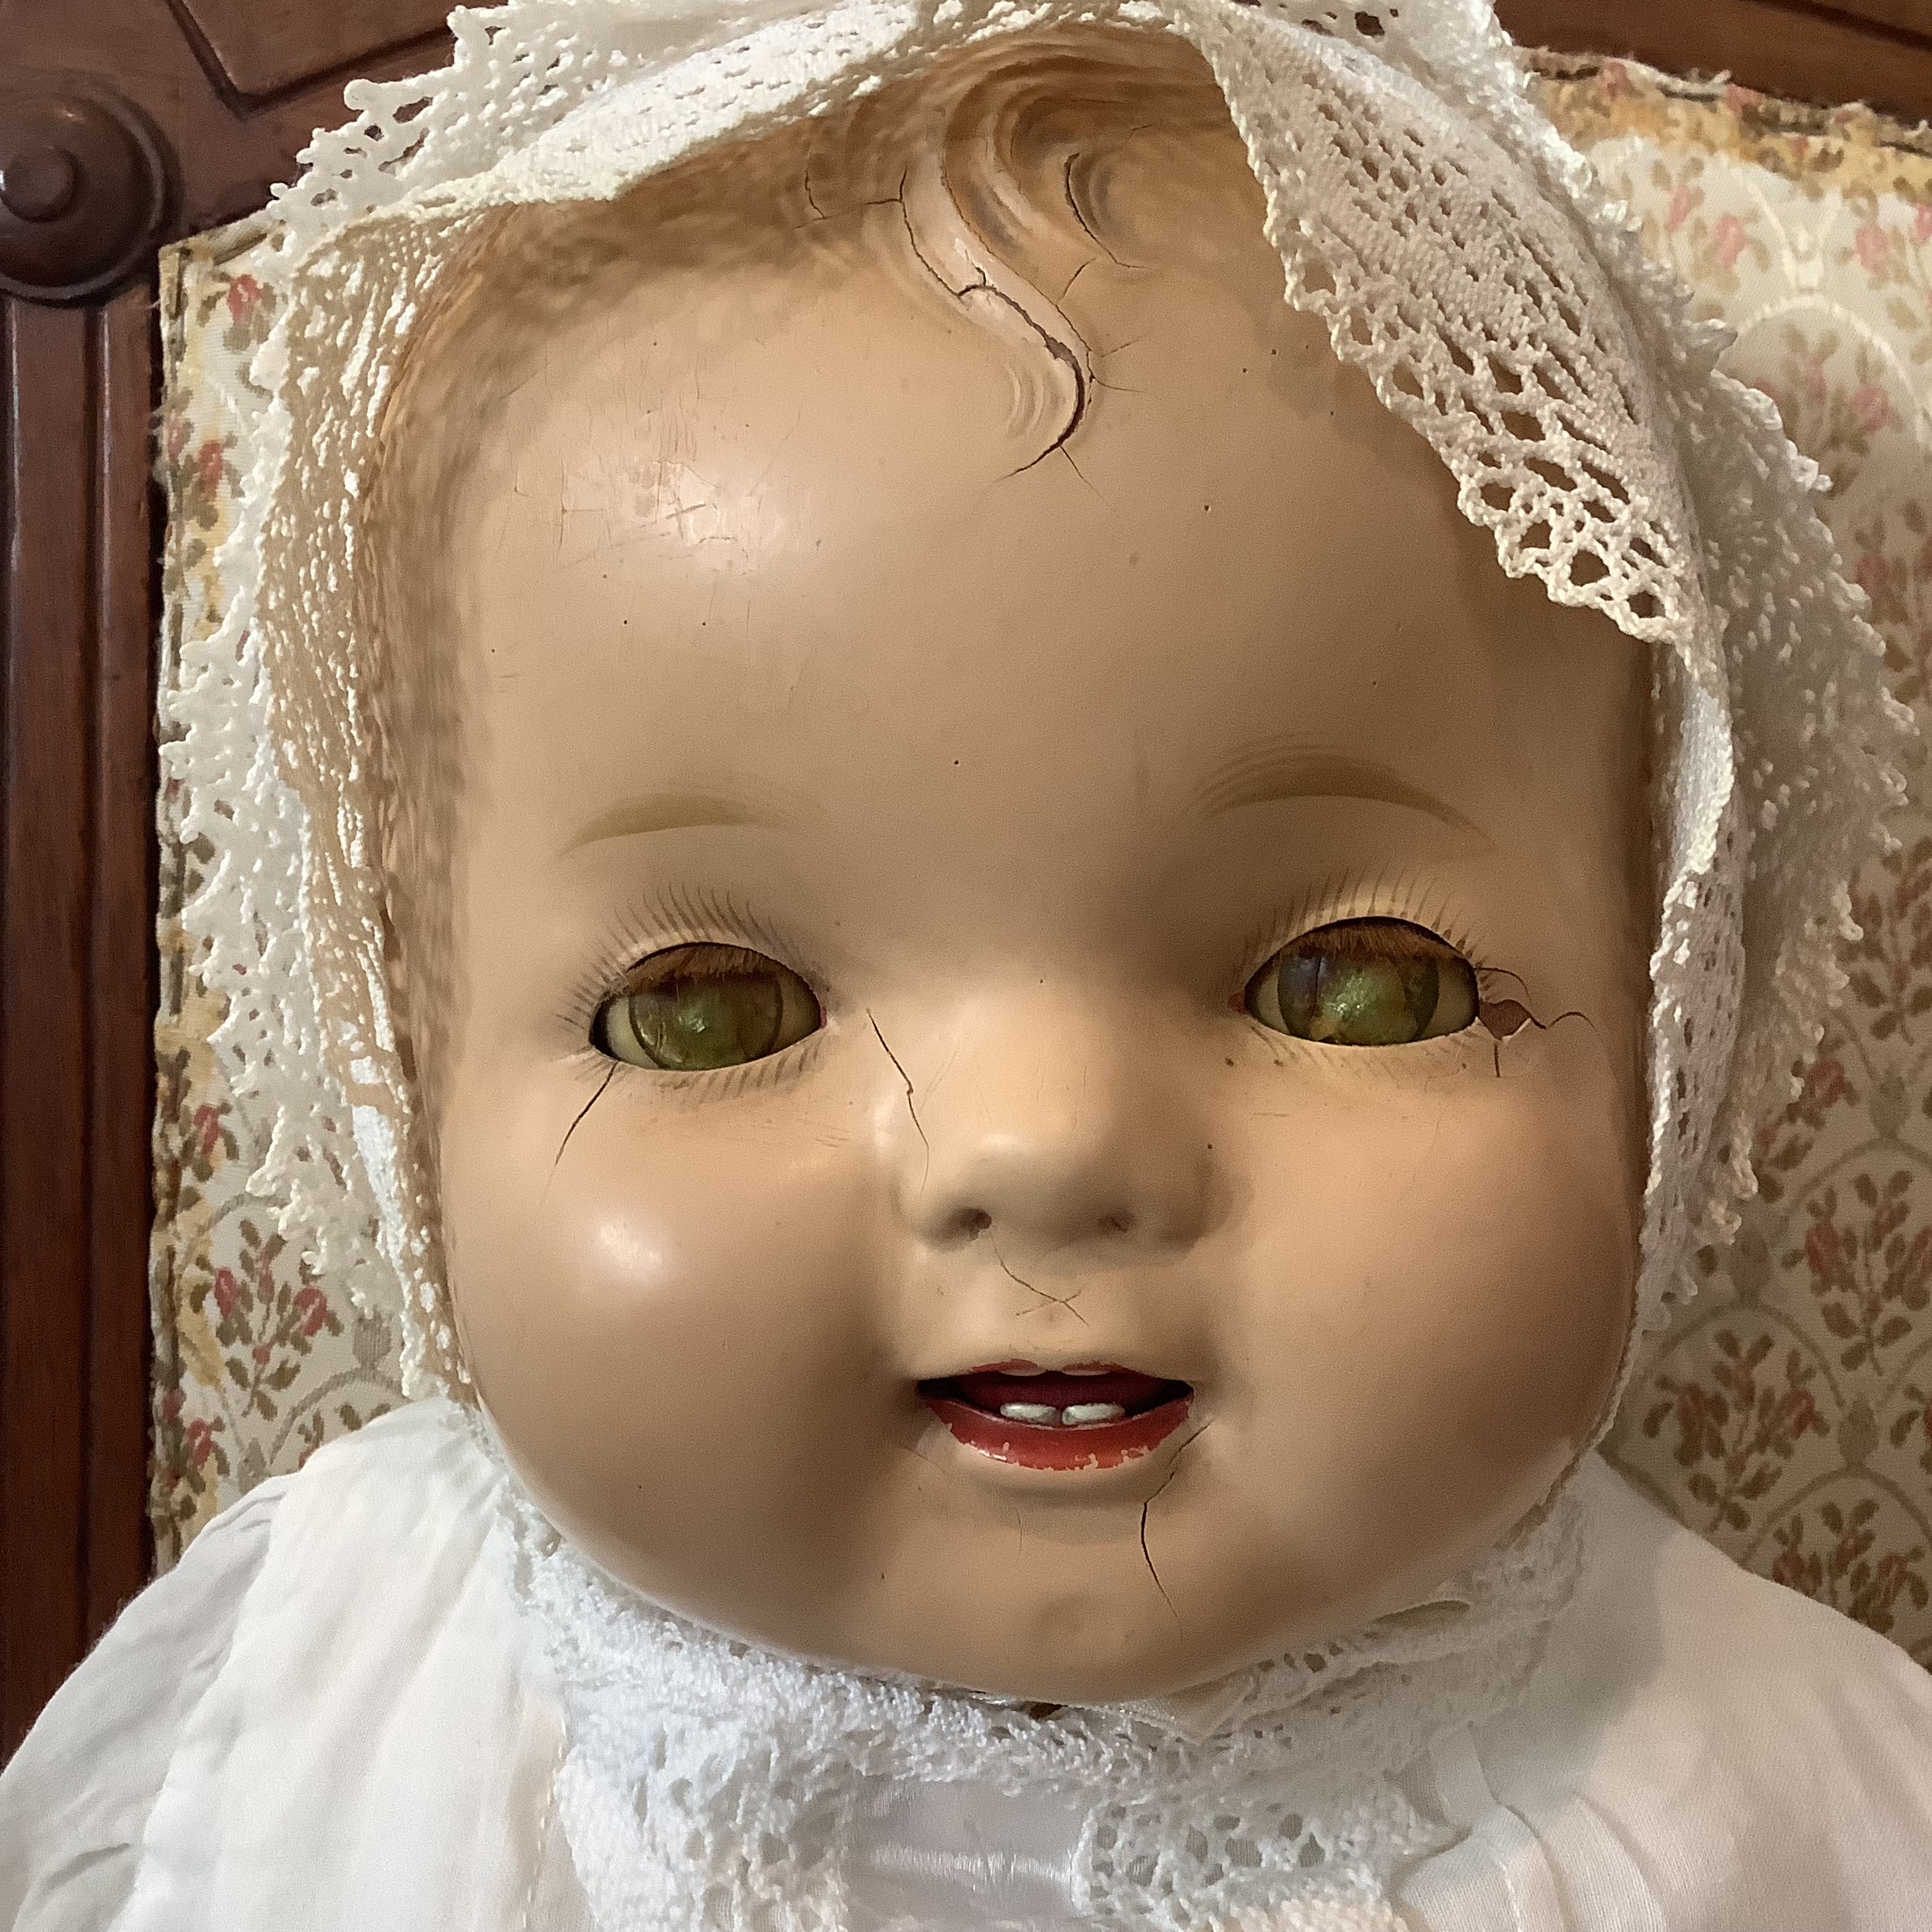 Vintage baby doll face with severe fading in eyes and cracks in face